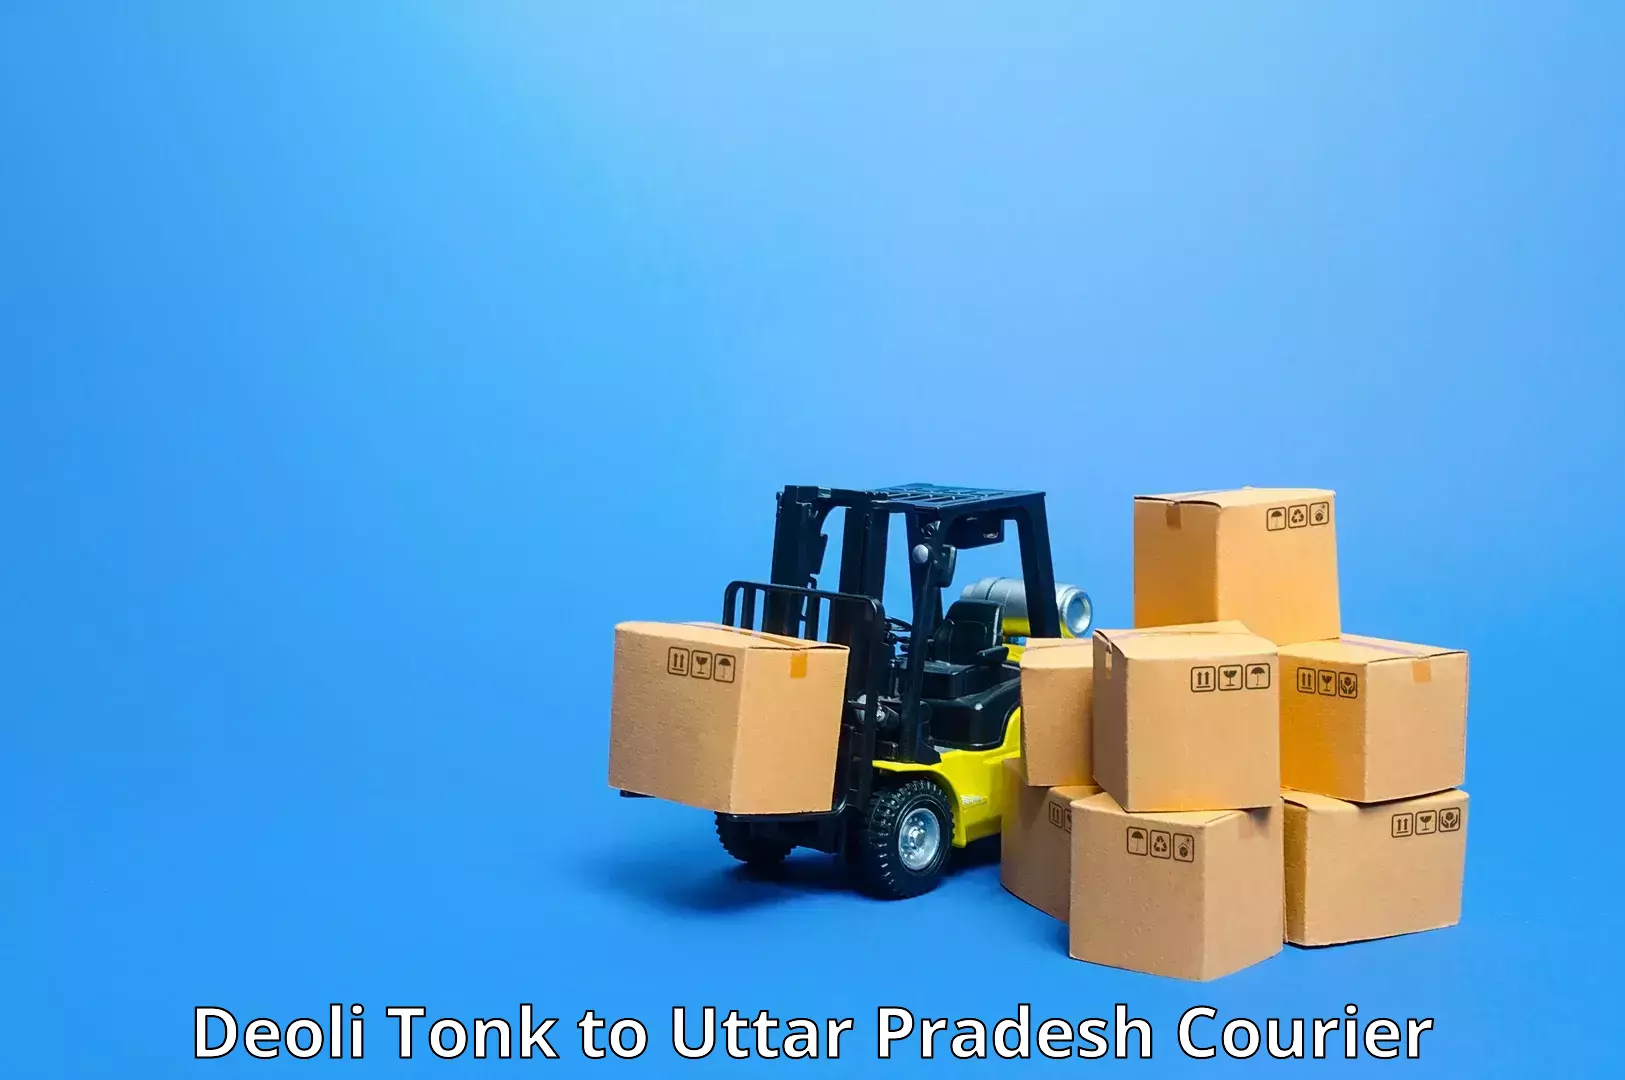 High-quality delivery services Deoli Tonk to Hamirpur Uttar Pradesh